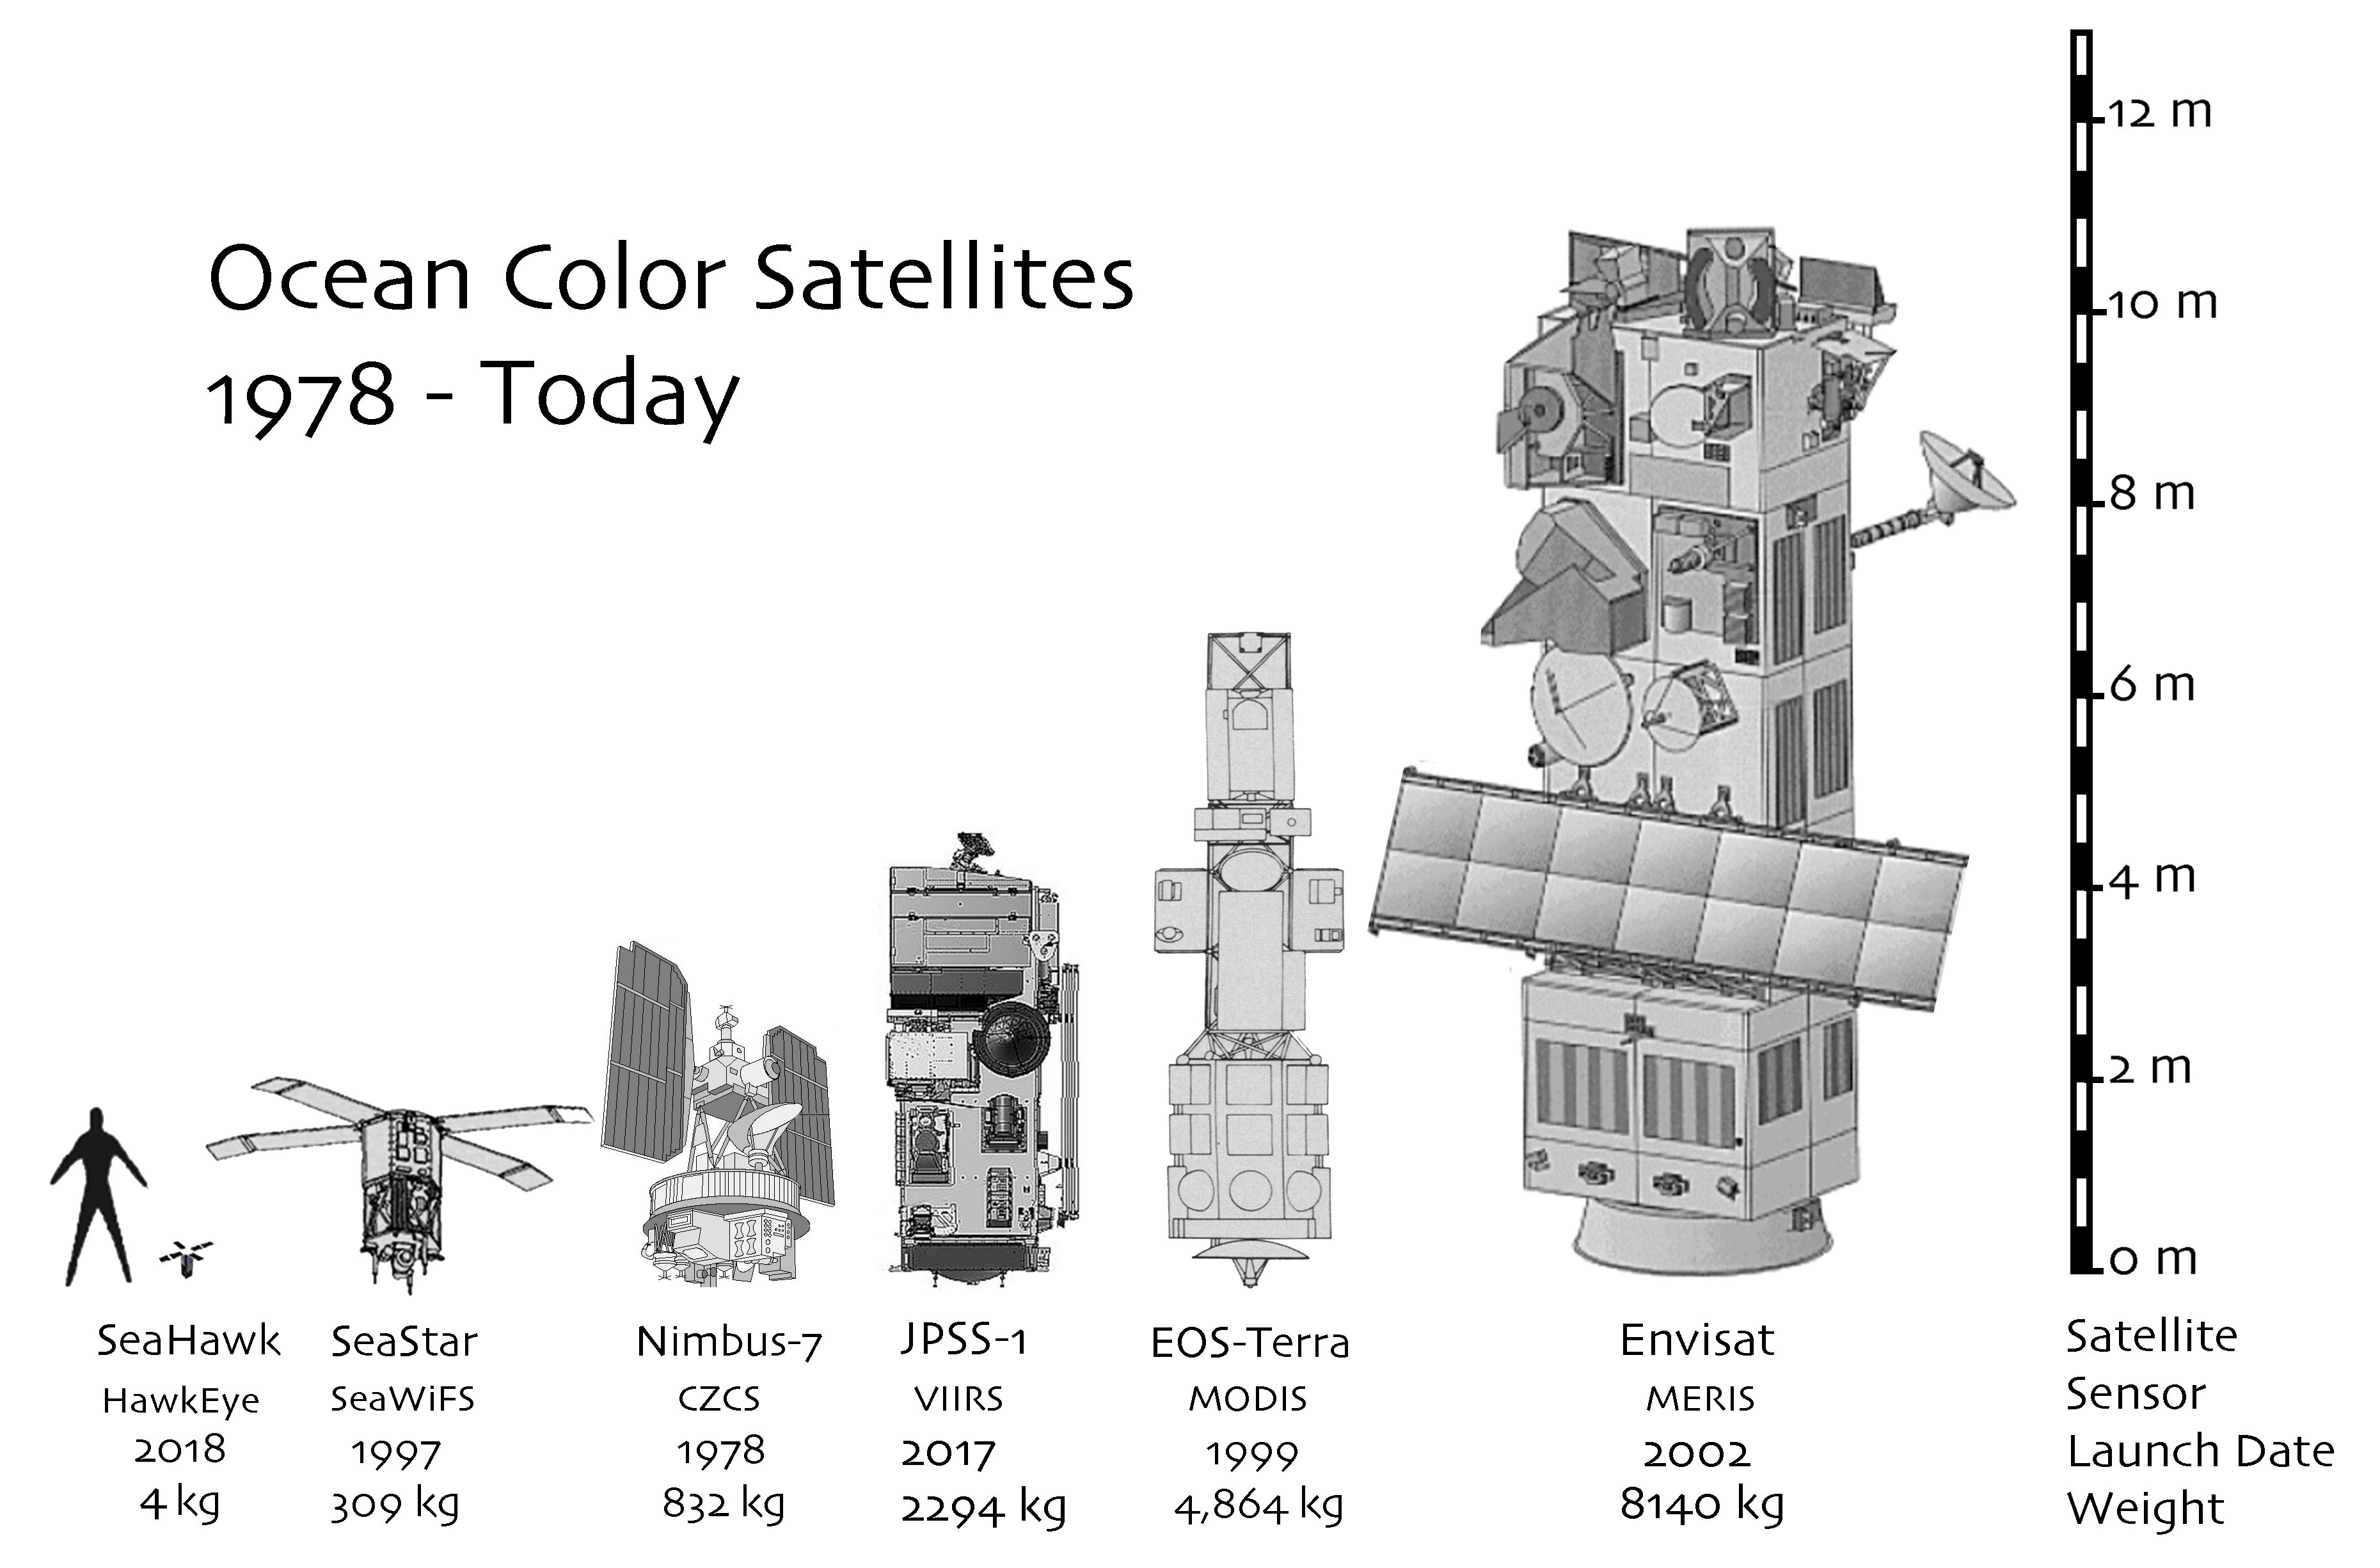 This graphic shows the height and weight of satellite imaging sensors from the 1978 to today.